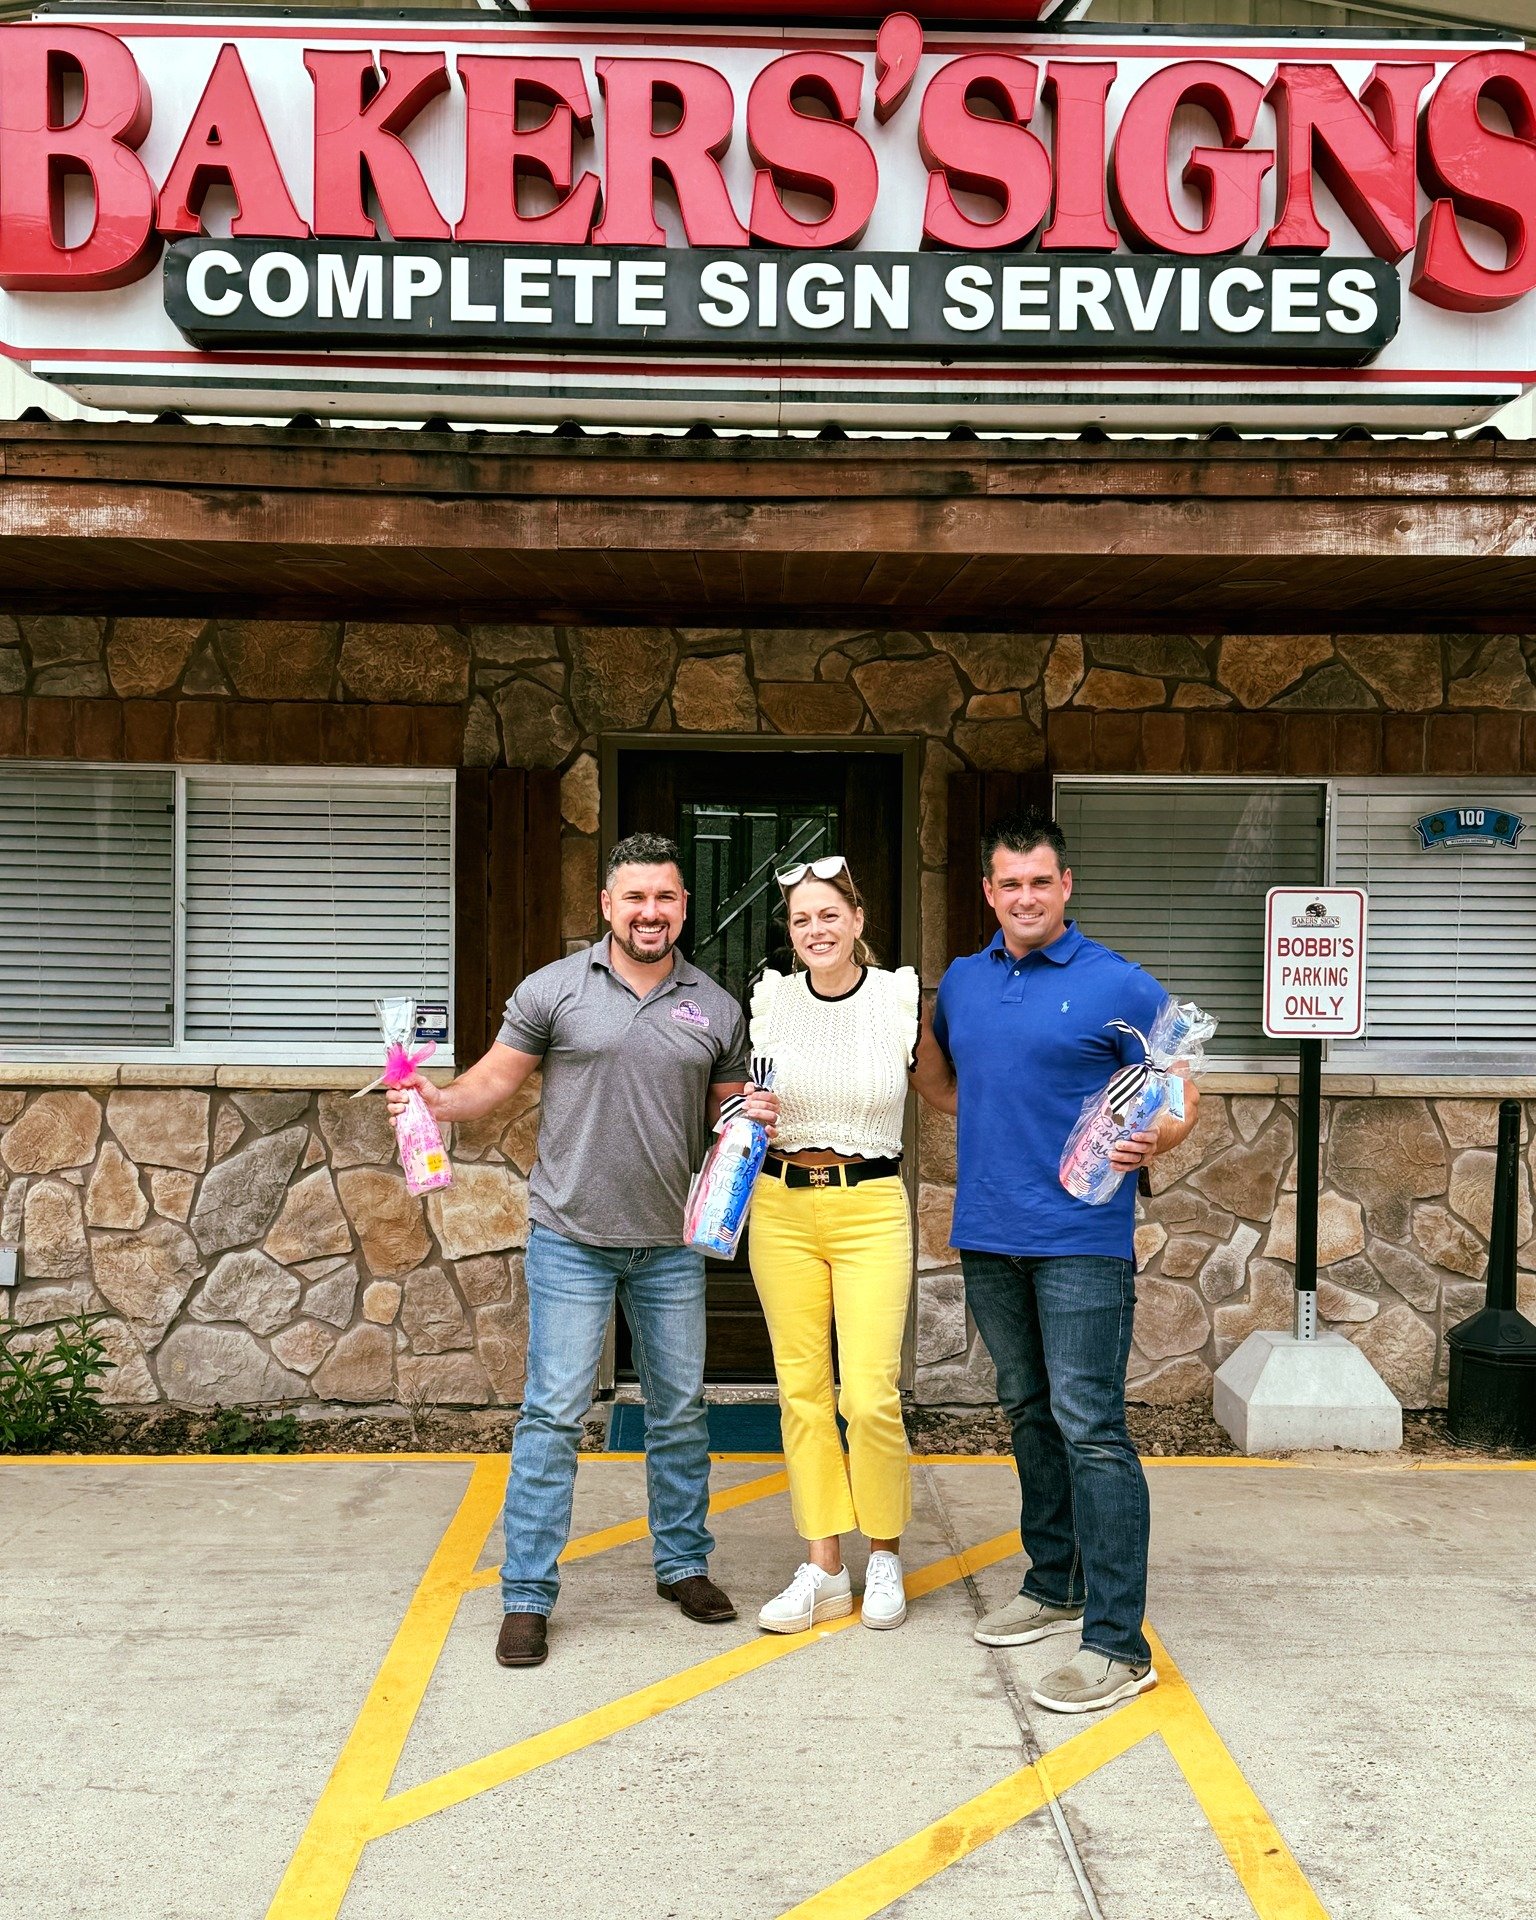 🎉 Look who stopped by our office today! Stephanie Stewart from Sign Remedy brightened our day with her visit. We had an amazing time discussing all things signage and creativity. 💡✨ Stay tuned for some exciting collaborations in the works! #SignRem